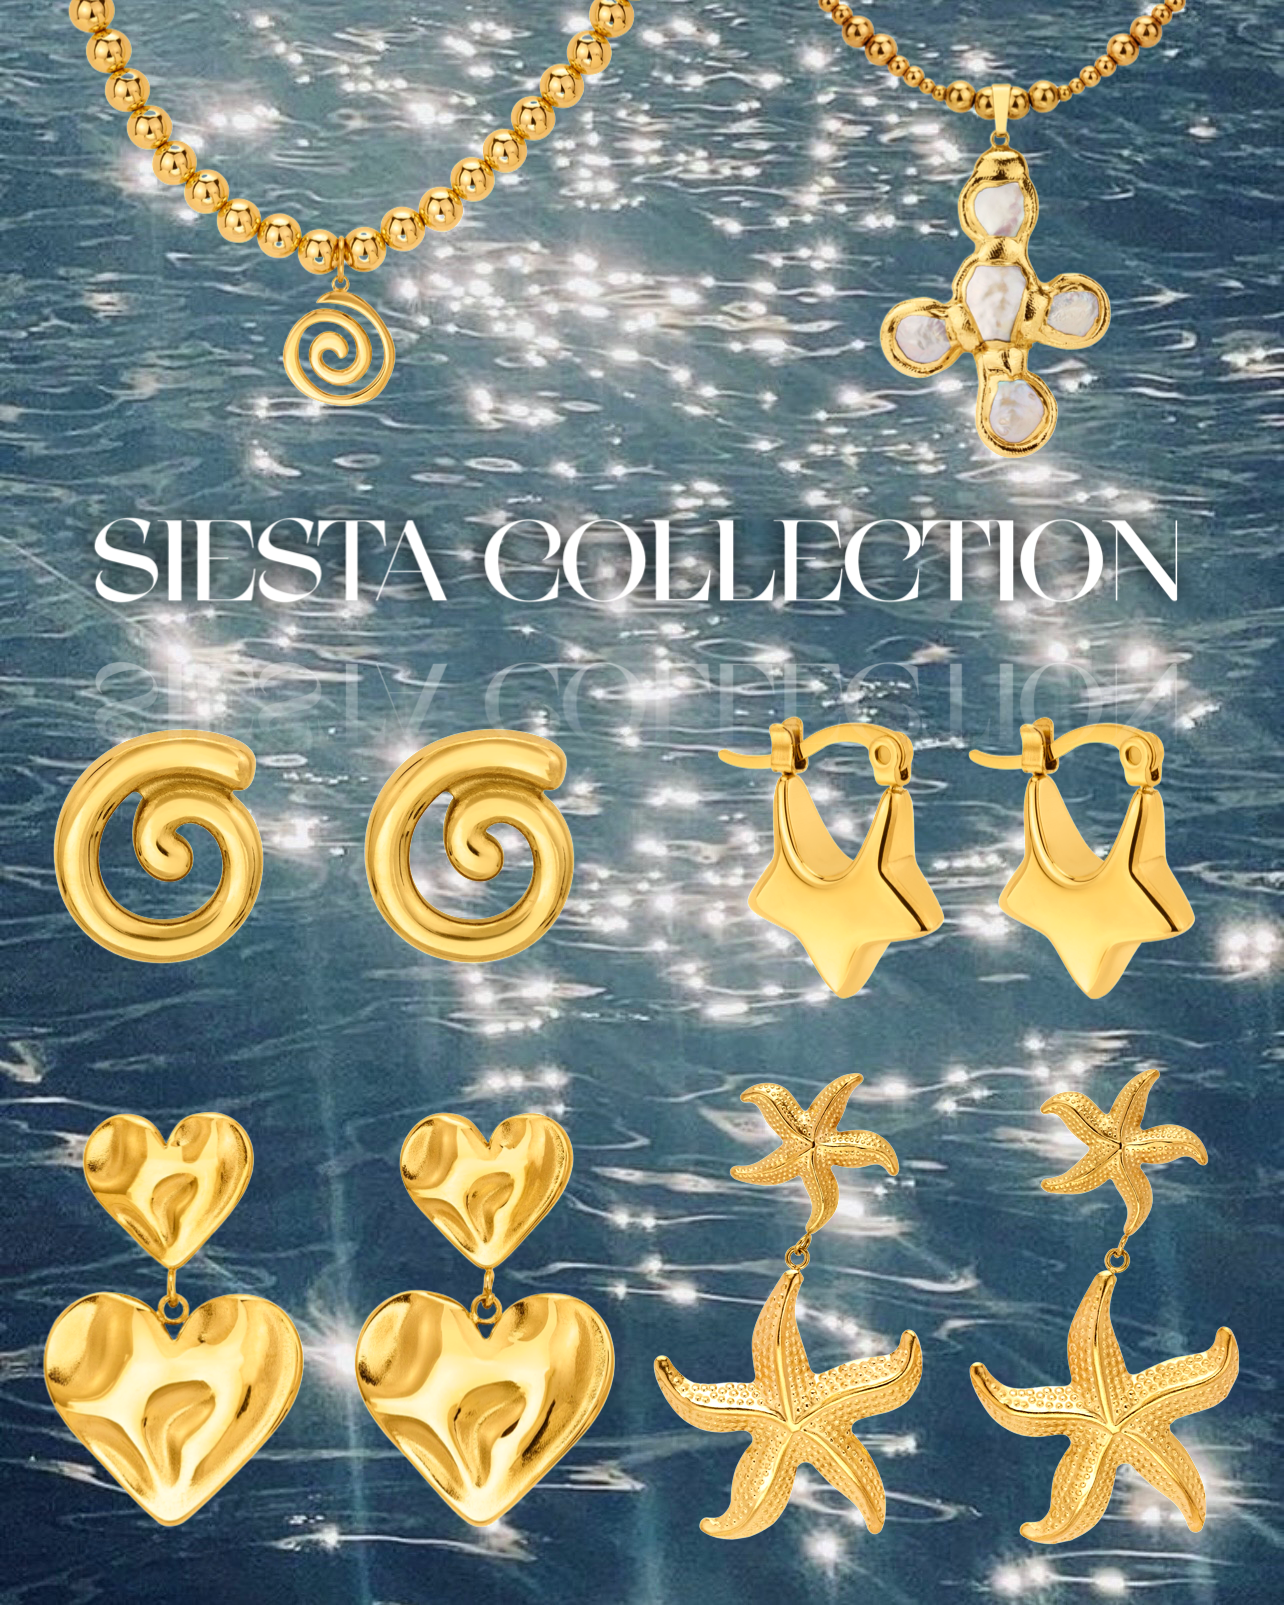 SIESTA COLLECTION